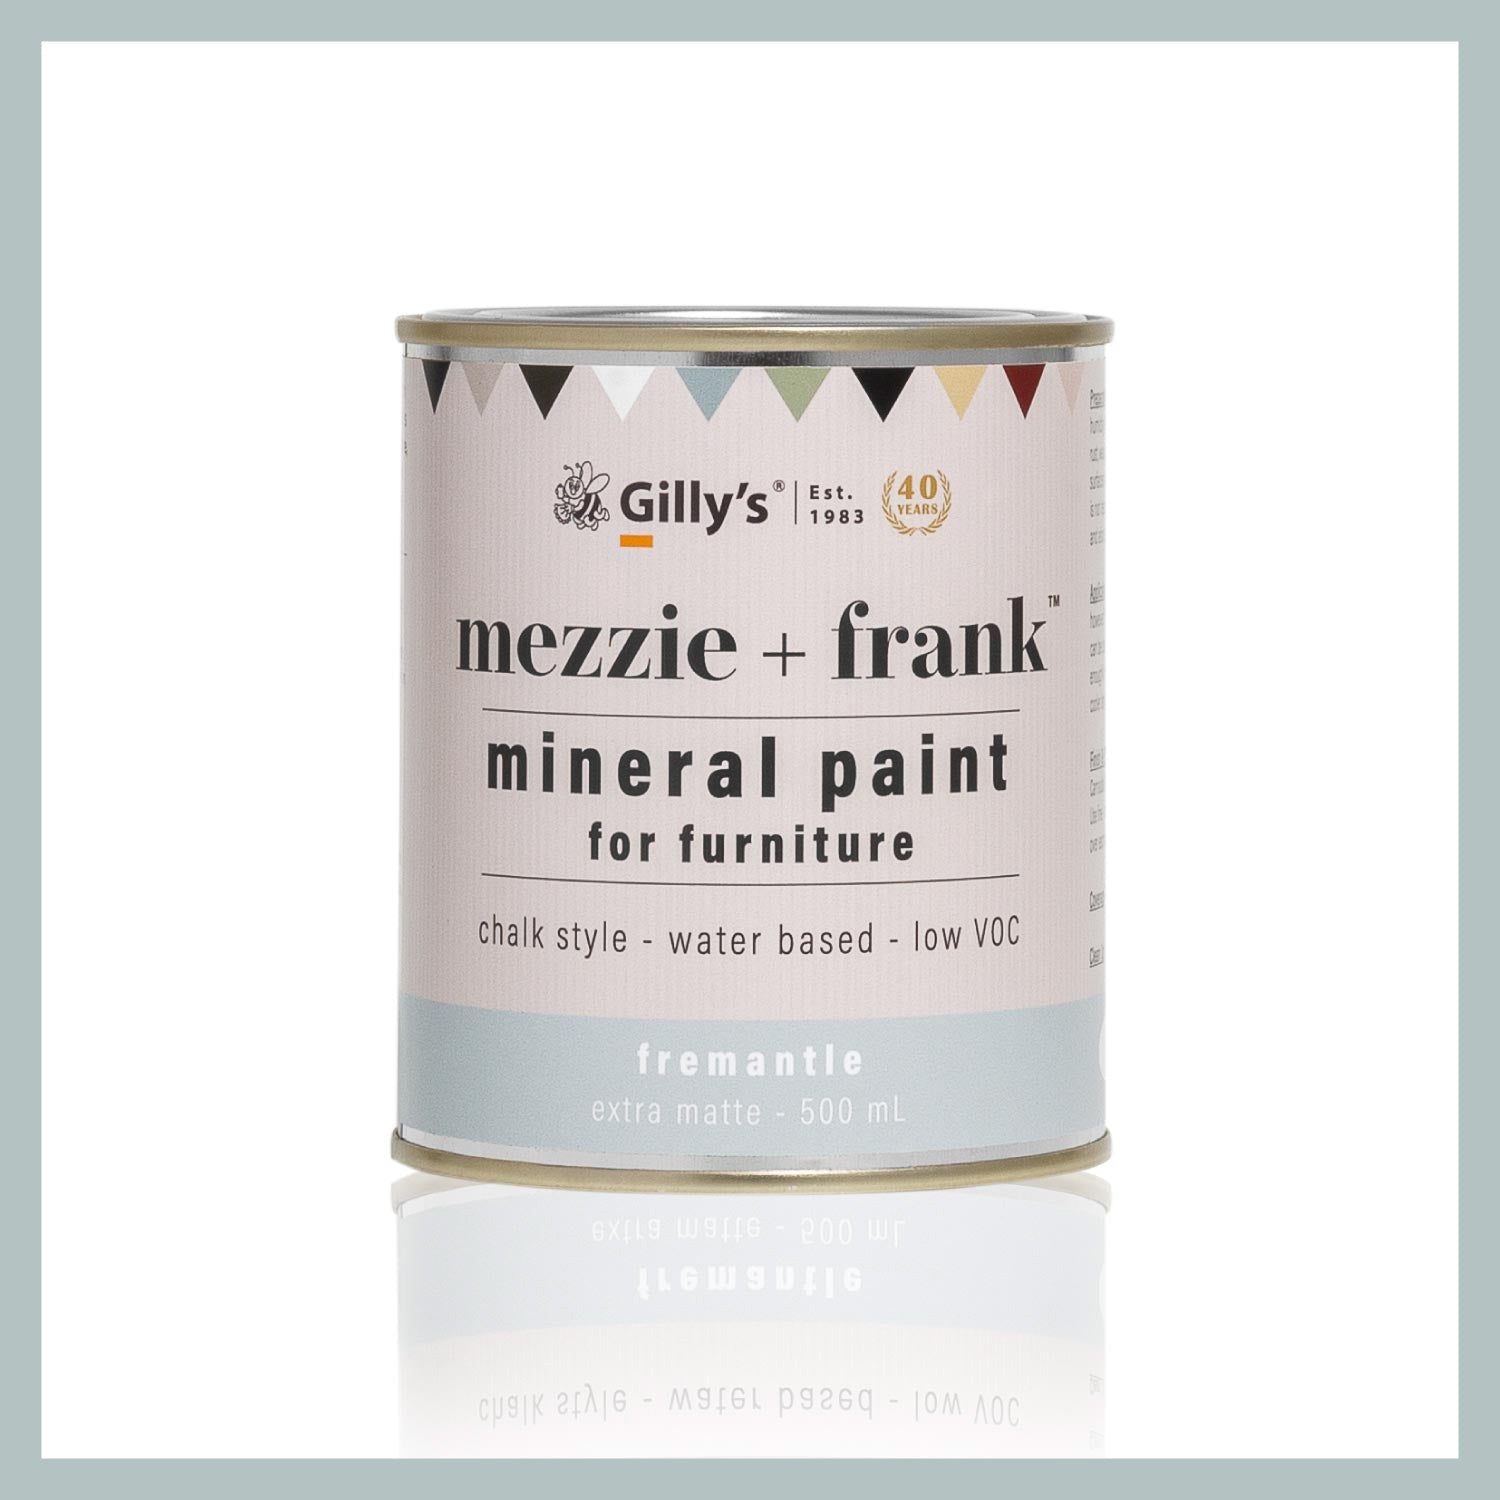 Mezzie + Frank Chalk Style Mineral Paint by Gilly's